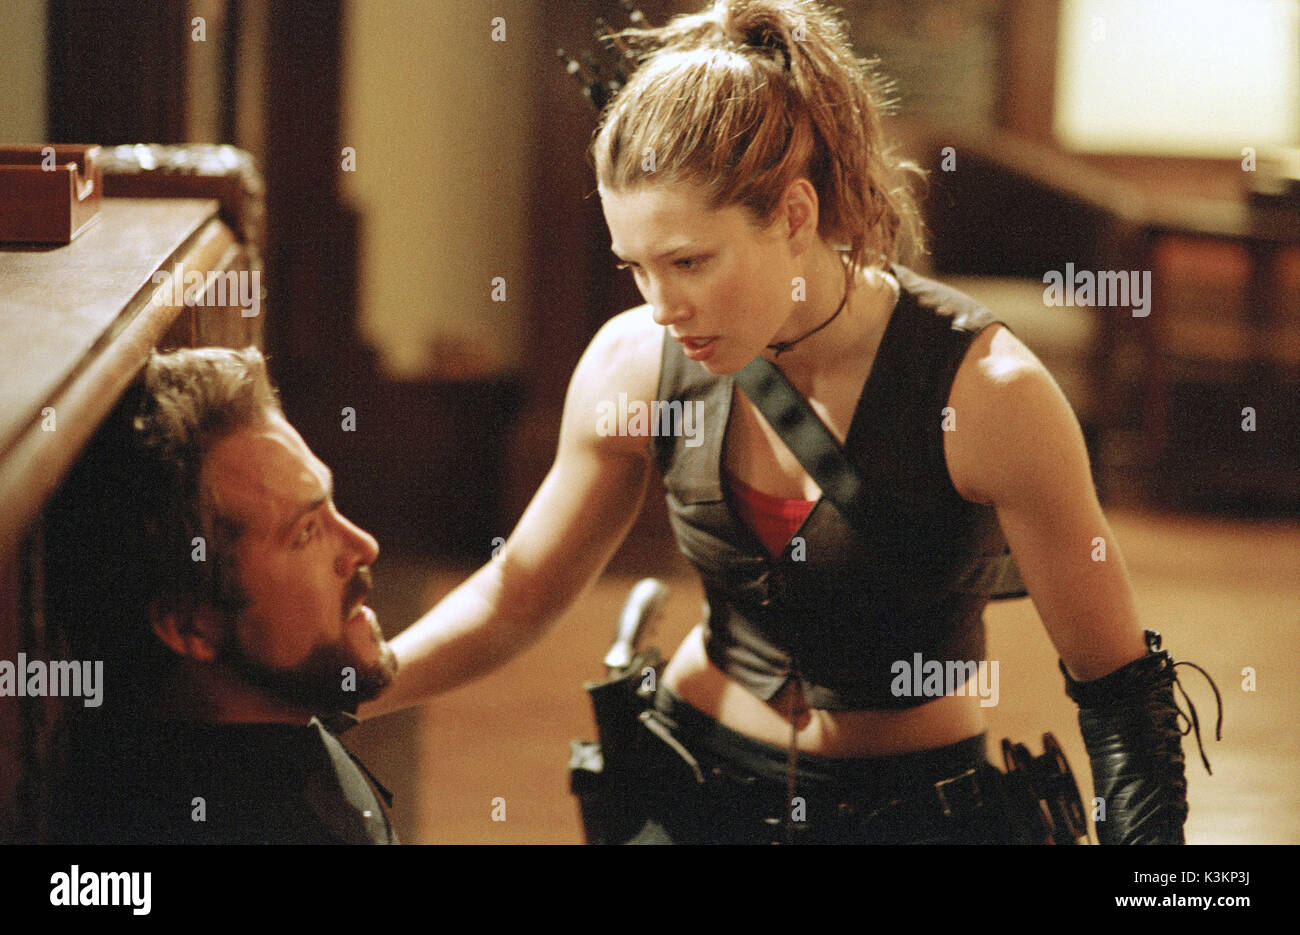 Jessica Biel Blade Trinity Blade High Resolution Stock Photography And Images Alamy Biel began her career as a vocalist appearing in musical productions until she. https www alamy com blade trinity ryan reynolds jessica biel date 2004 image157171718 html